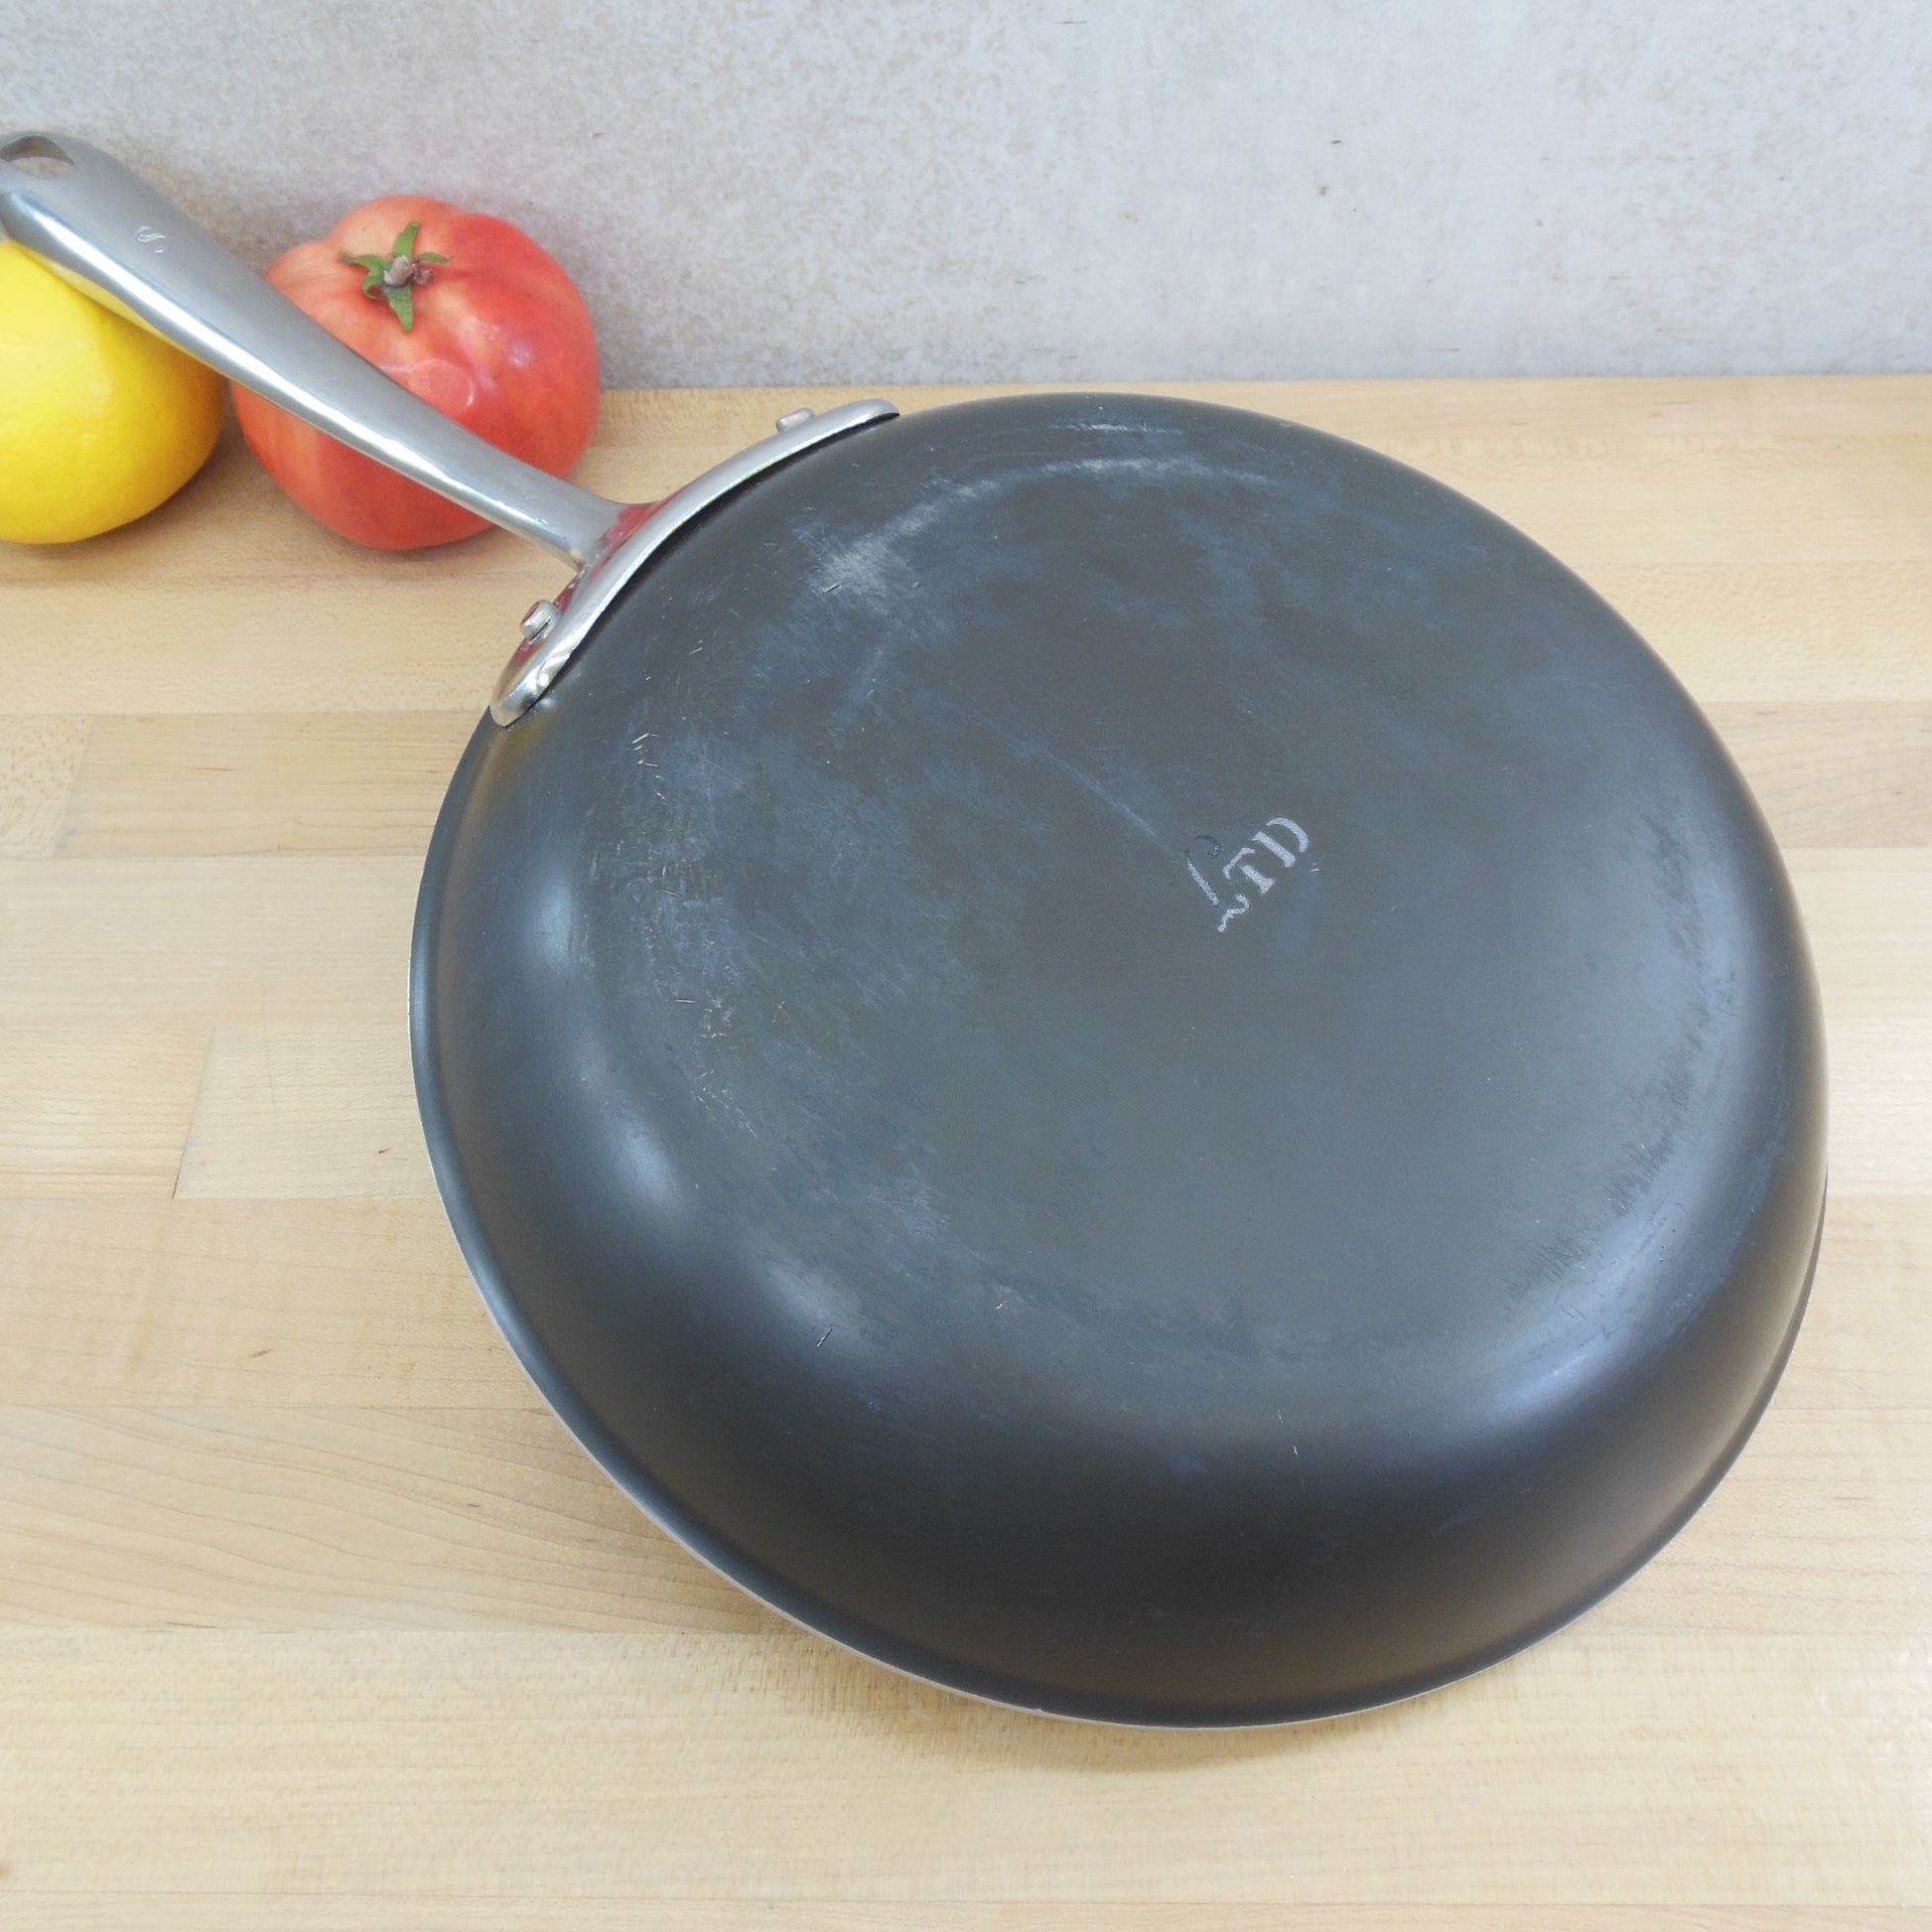 All-Clad Ltd. USA Anodized Stainless 10" Fry Pan Skillet Bottom